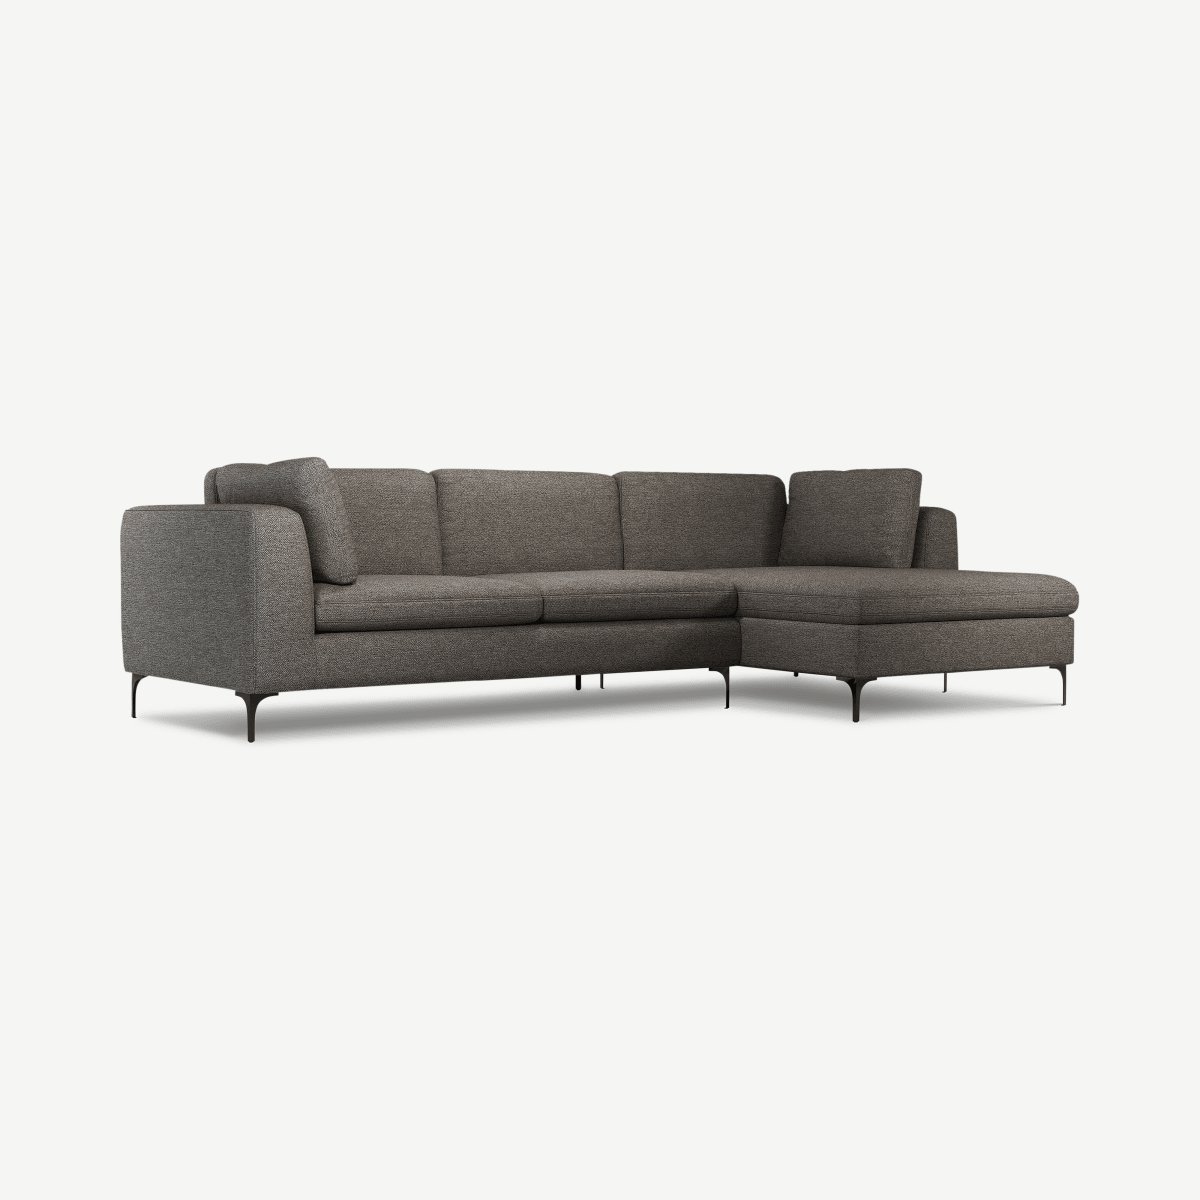 Monterosso Right Hand Facing Chaise End Sofa, Coin Grey Textured Fabric with Black Legs